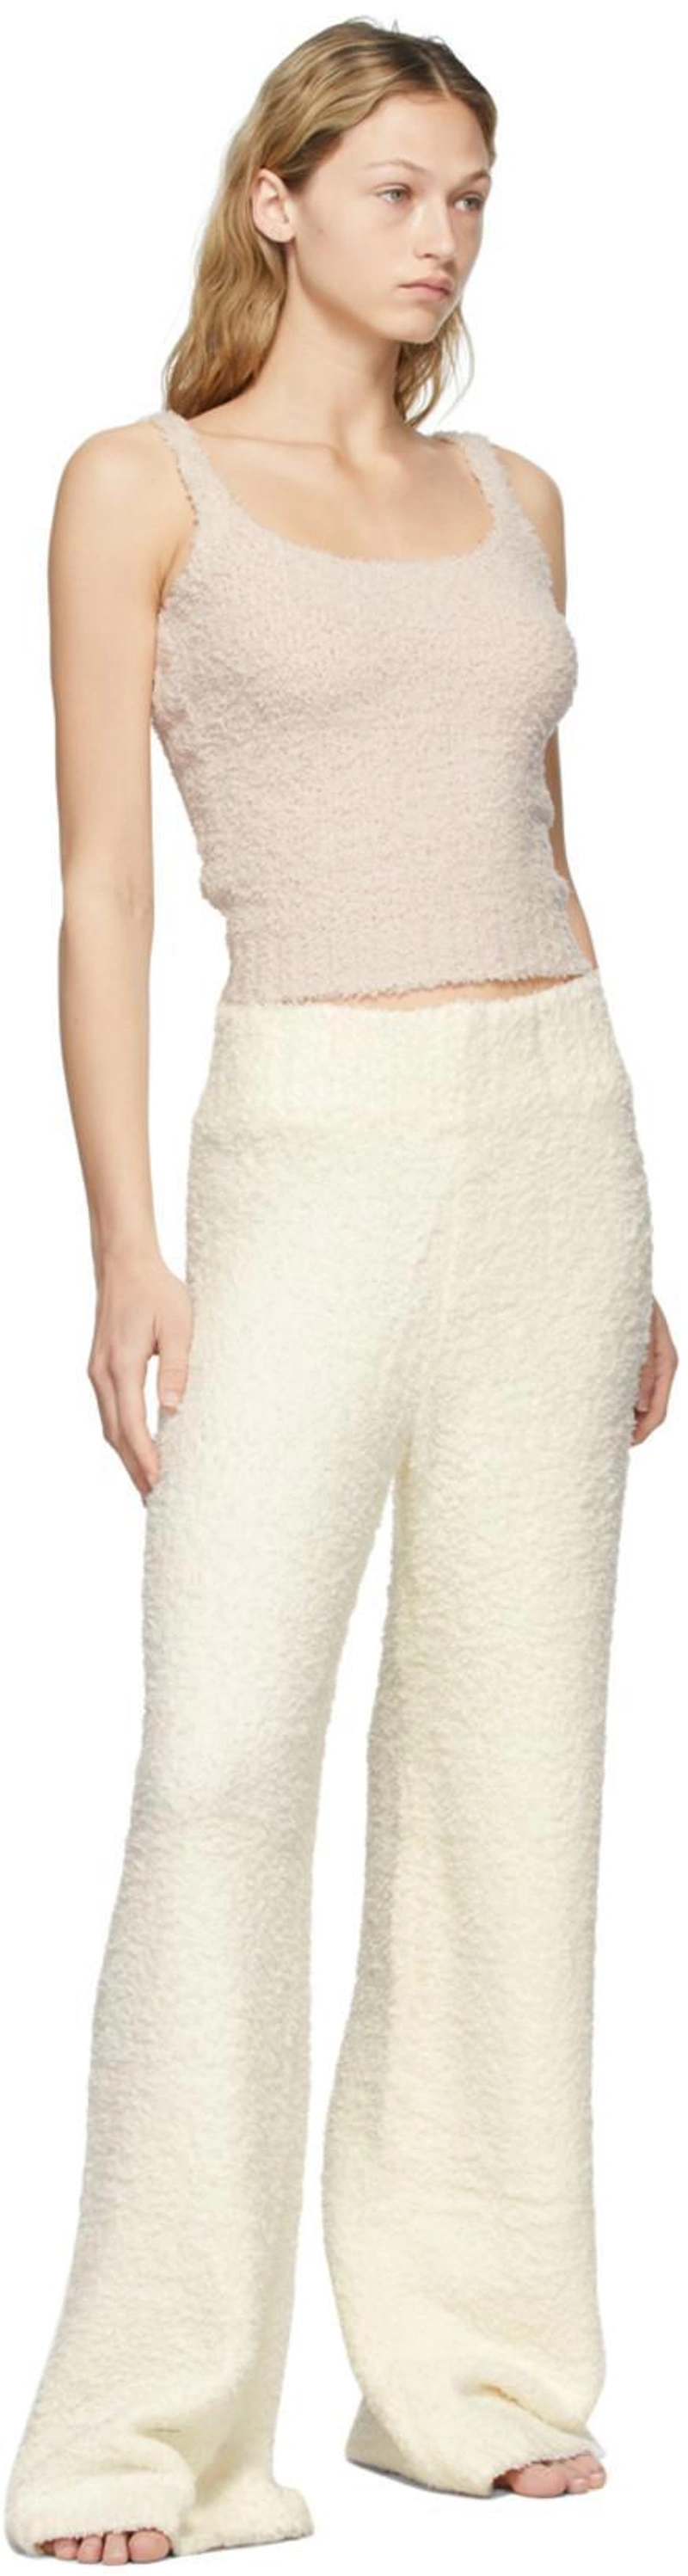 SSENSE's Post | Wearing: Skims Pink Knit Cozy Tank Top In Dusk; Skims Off-white Knit Cozy Lounge Pants In Ivory